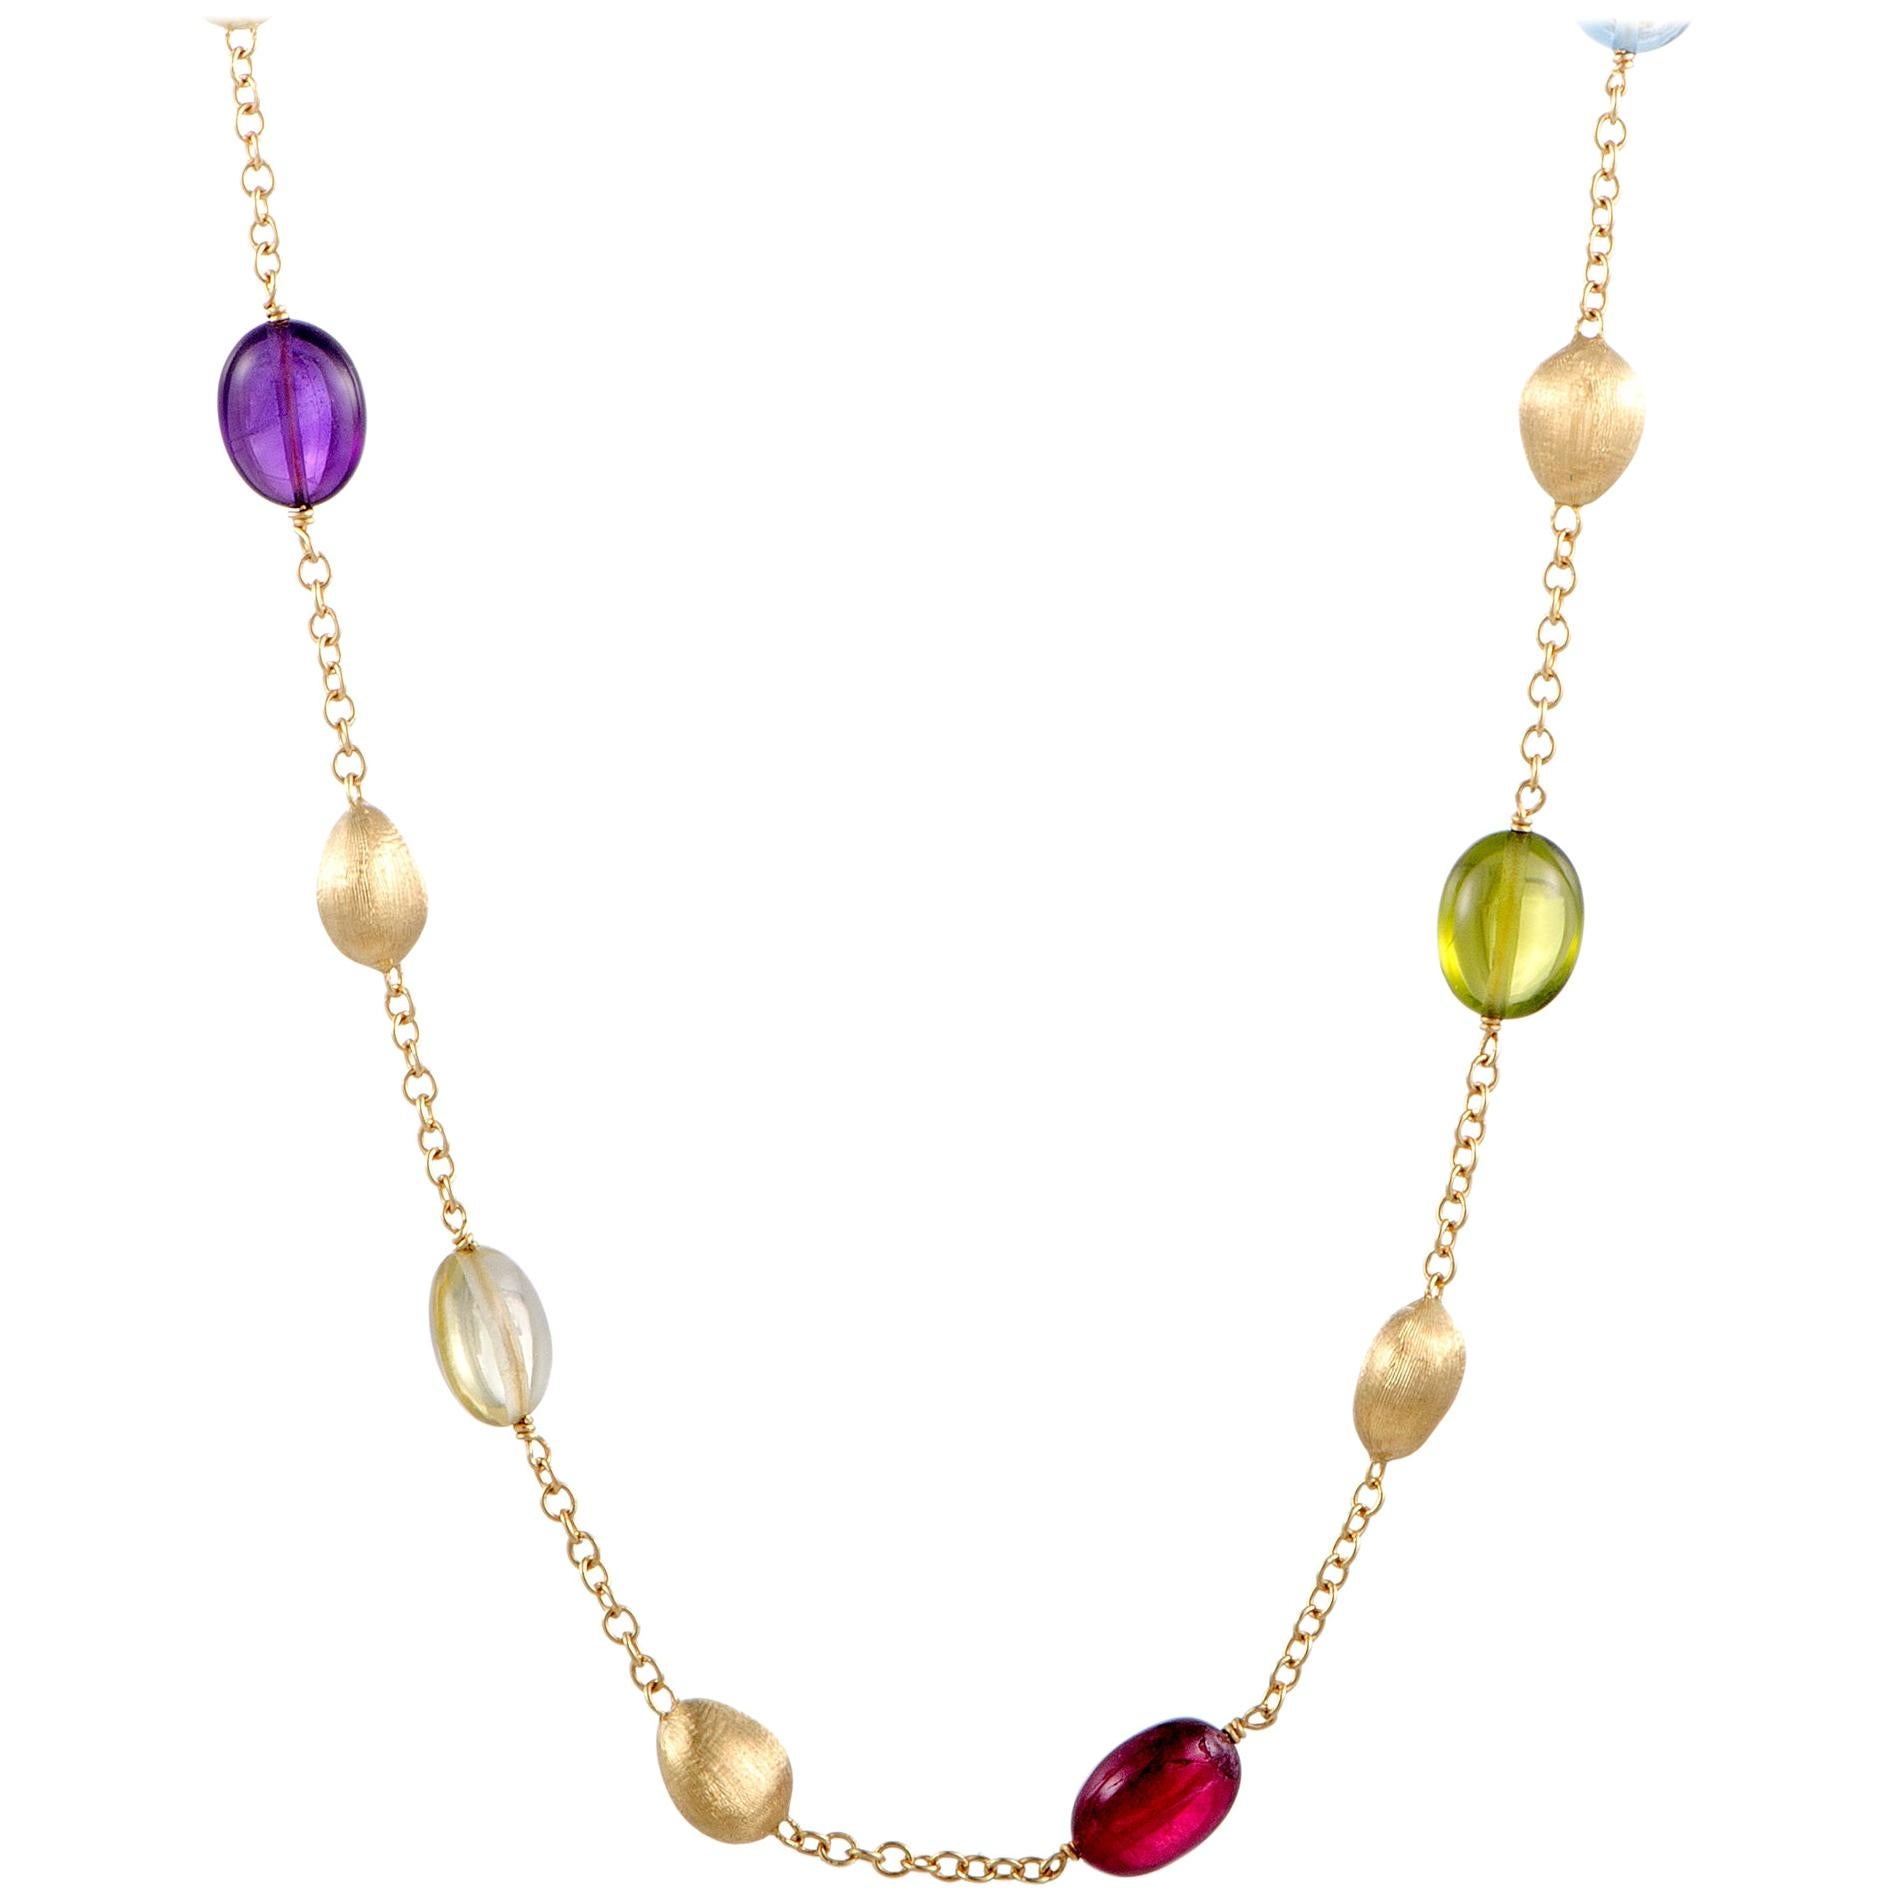 Marco Bicego 18 Karat Yellow Gold and Multiple Gemstone Necklace